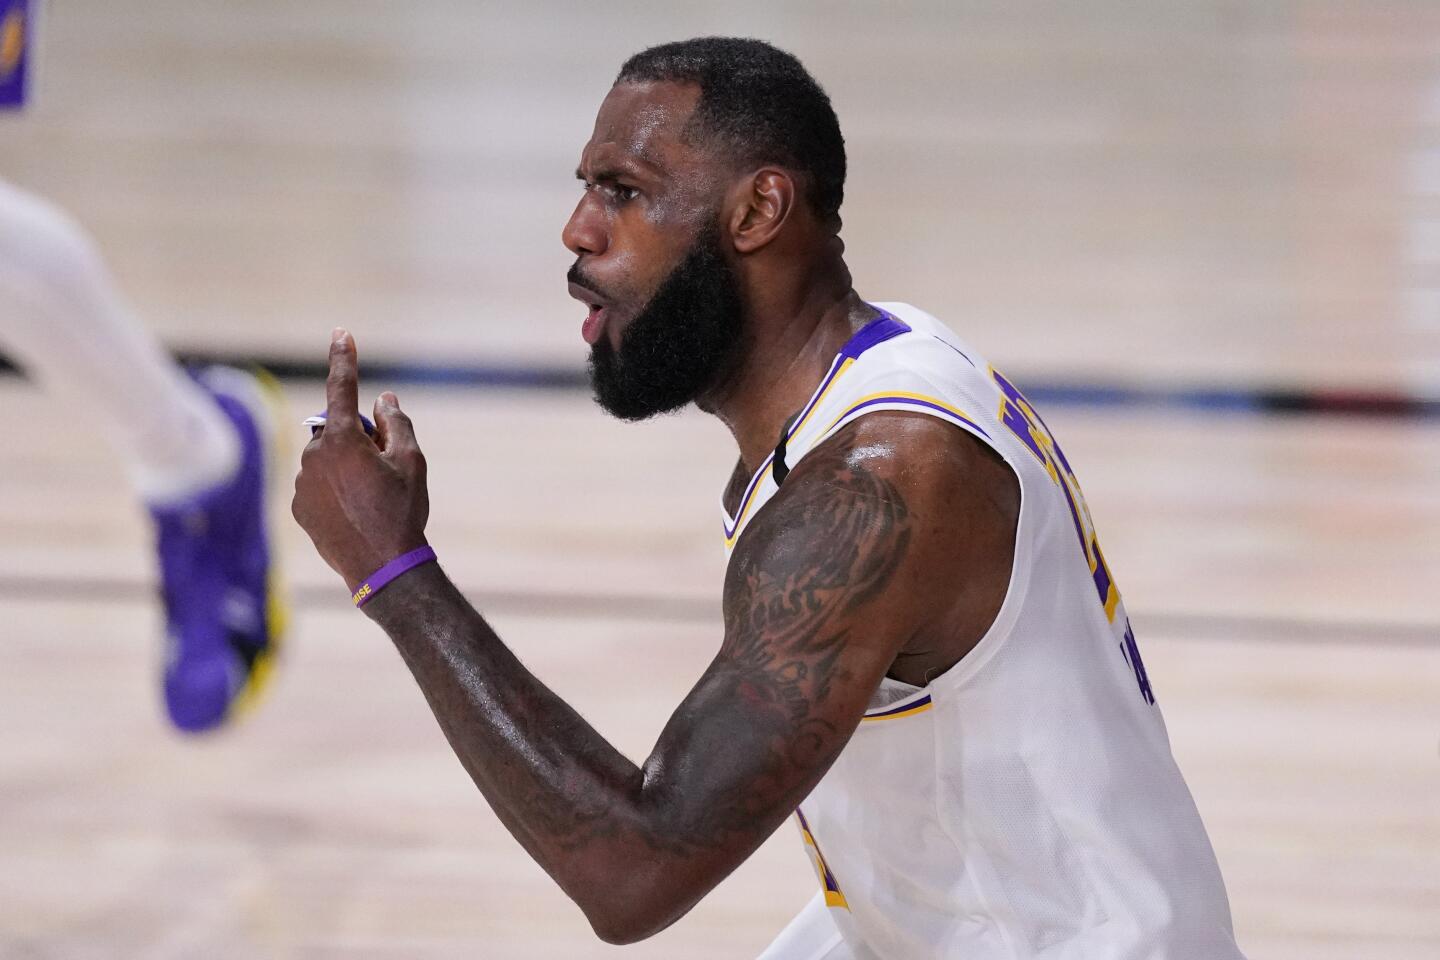 The Lakers' LeBron James celebrates during the second half Saturday against the Rockets.